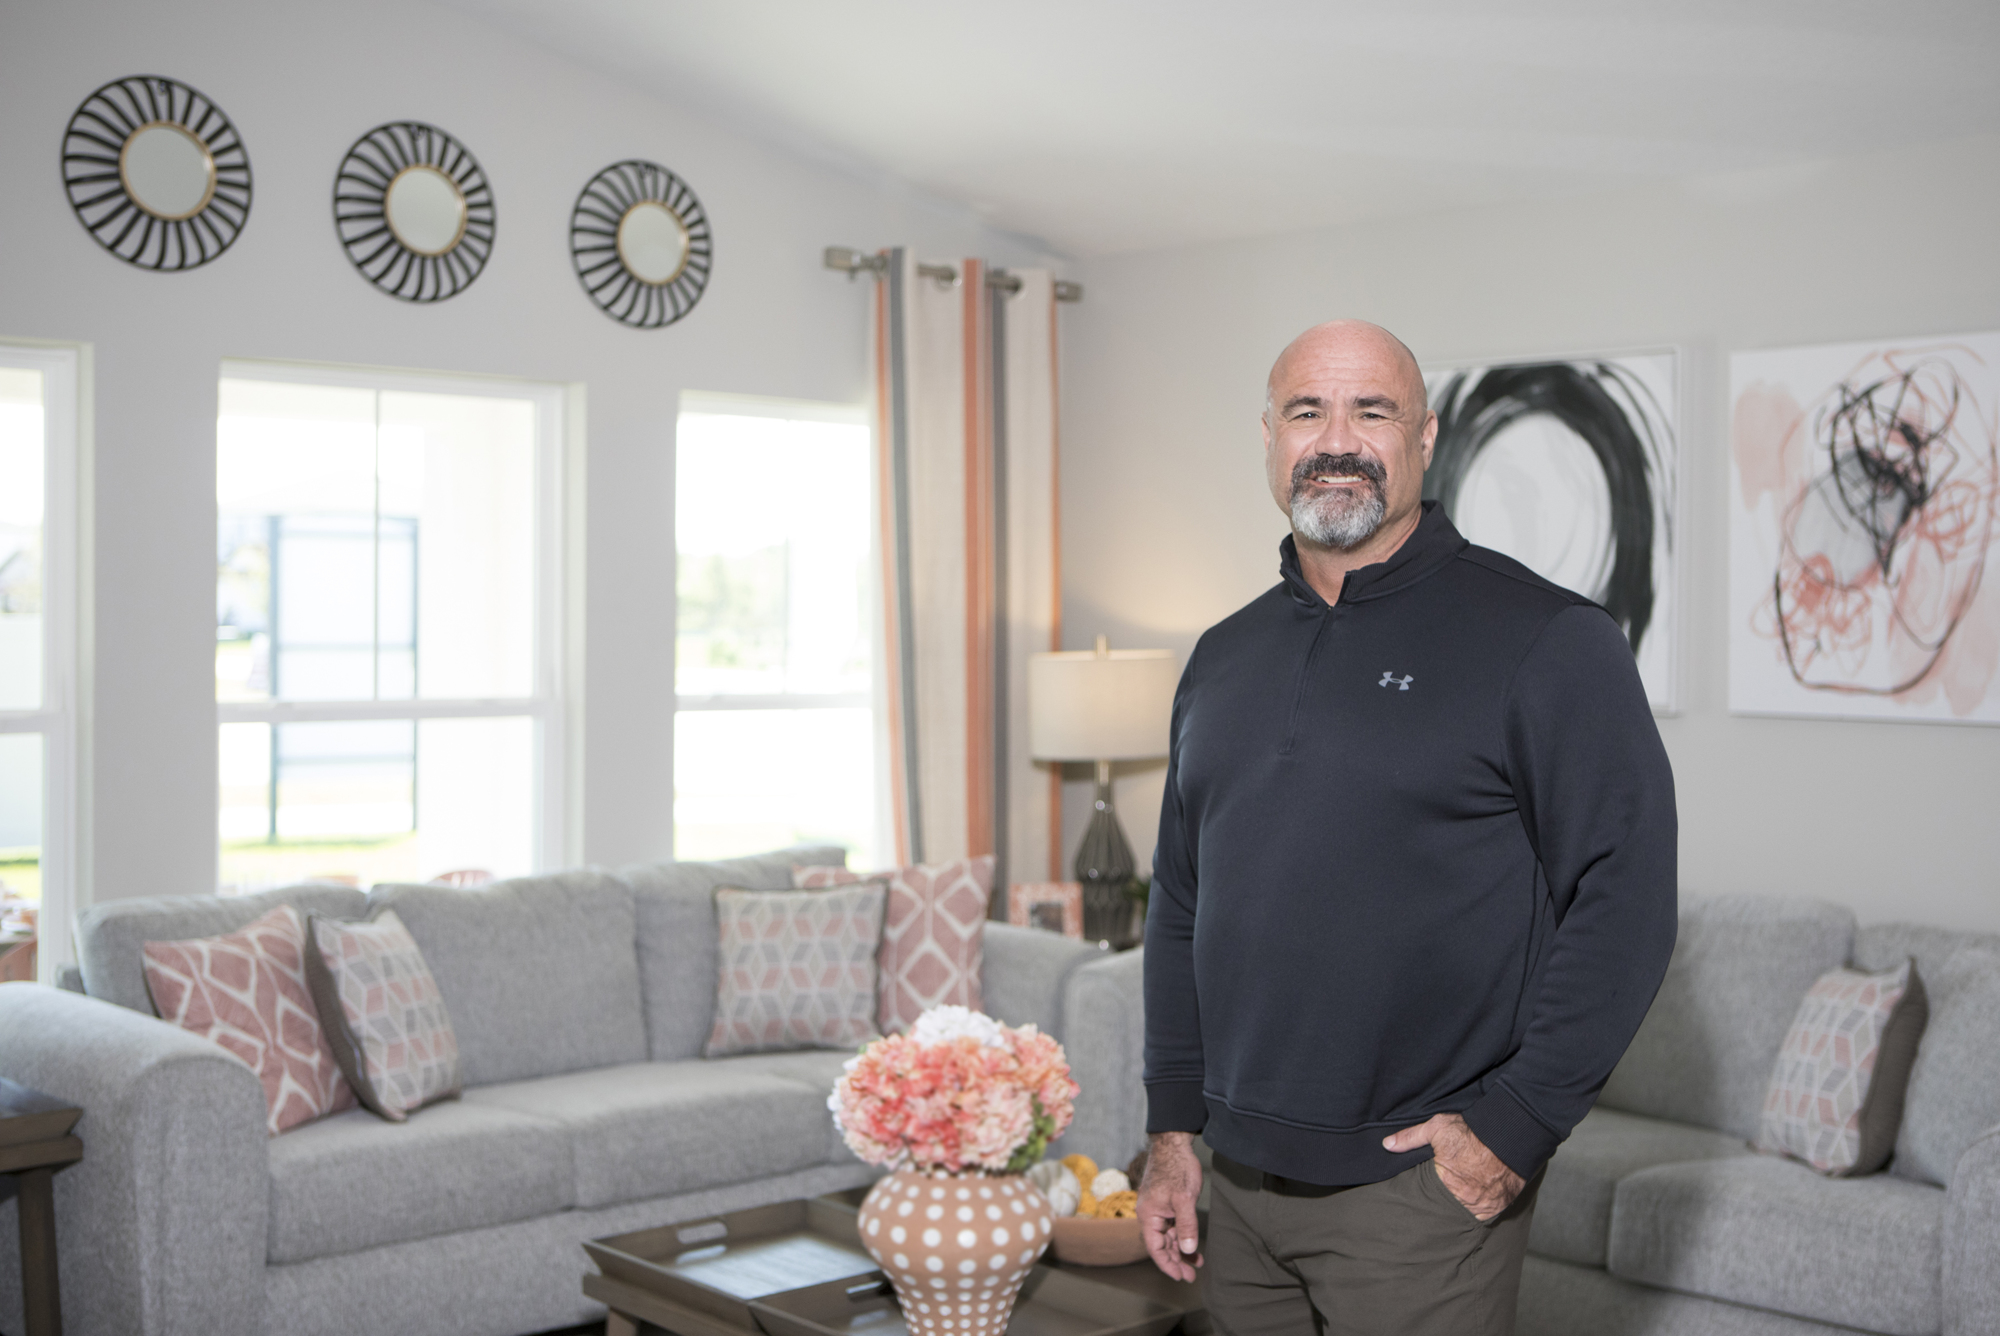 Mark Wemple. Homes by Westbay President Willy Nunn believes the company’s Casa Fresca unit has big potential to lure more first-time homebuyers as customers.